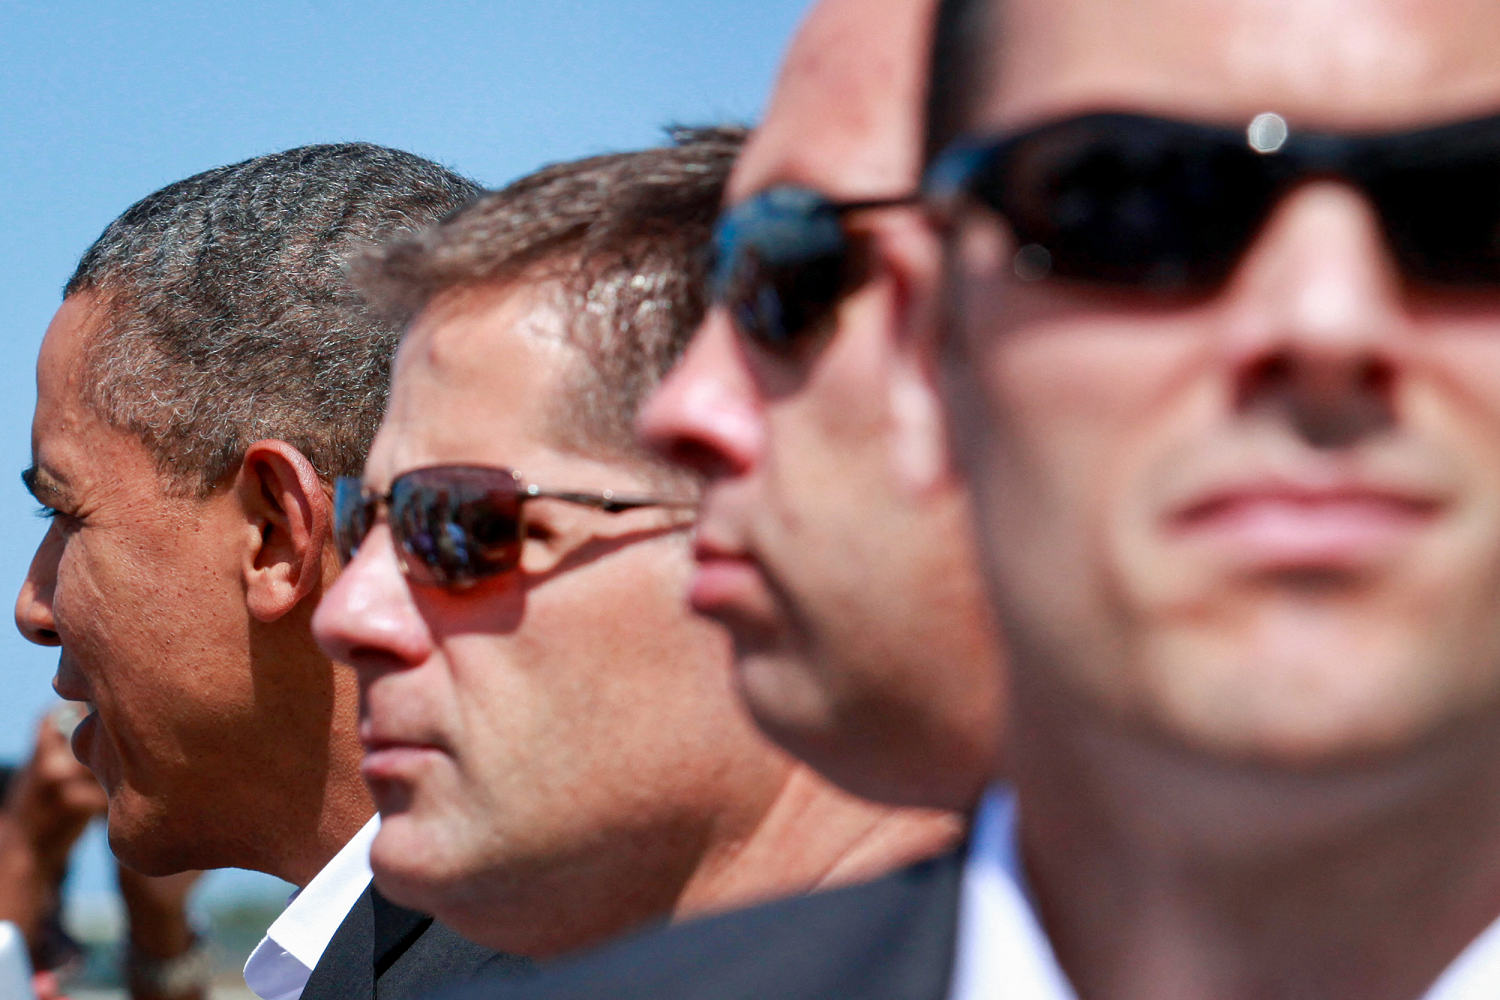 'Agency in Crisis': Secret Service has decade-old staffing shortfall